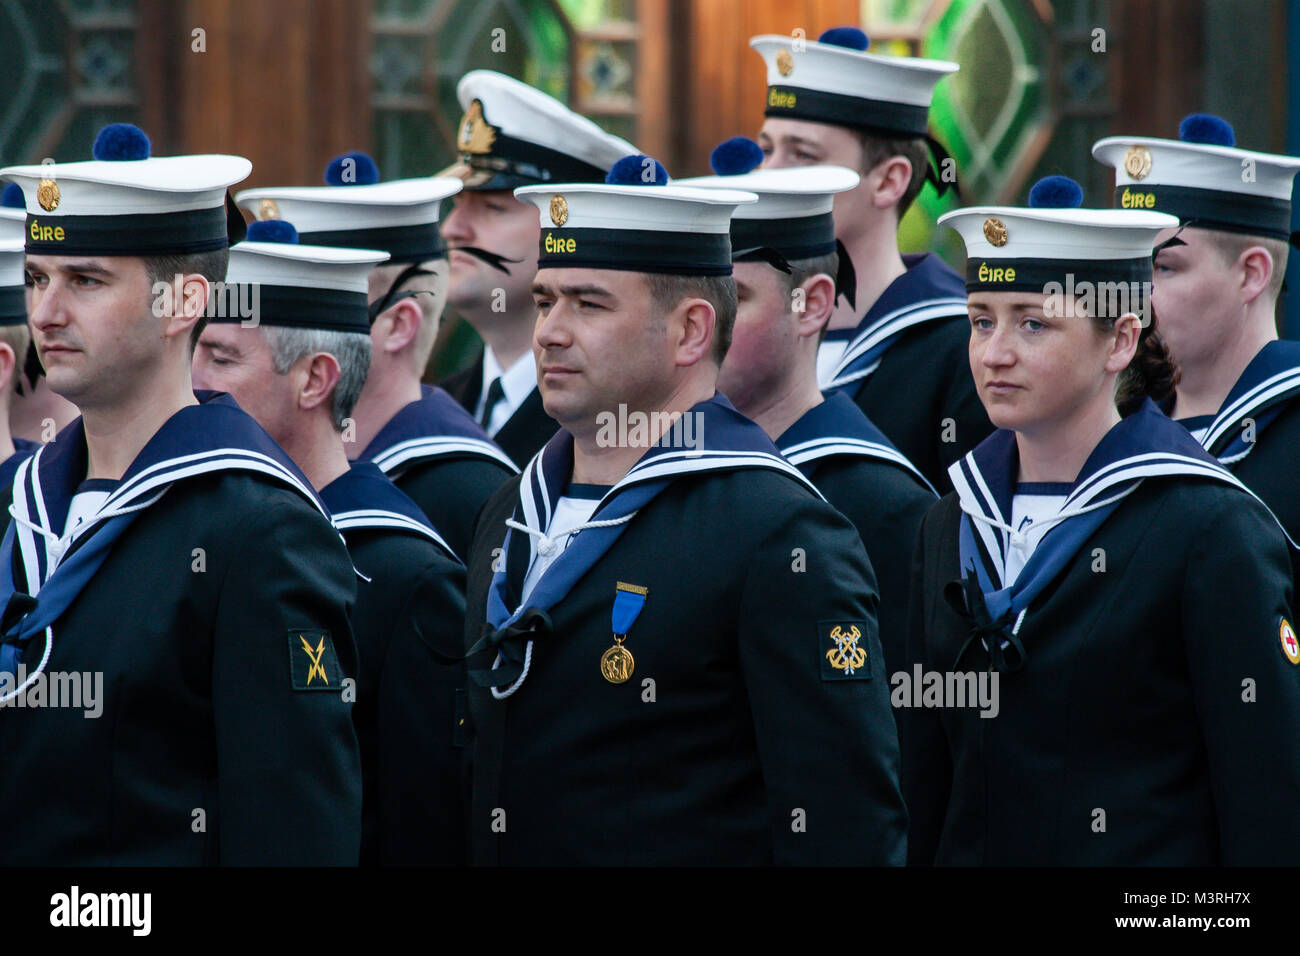 Irish Naval Service Warrant Officers standing ready for the parade at the 1916 Easter Rising commemoration in Dublin City Center, Ireland Stock Photo